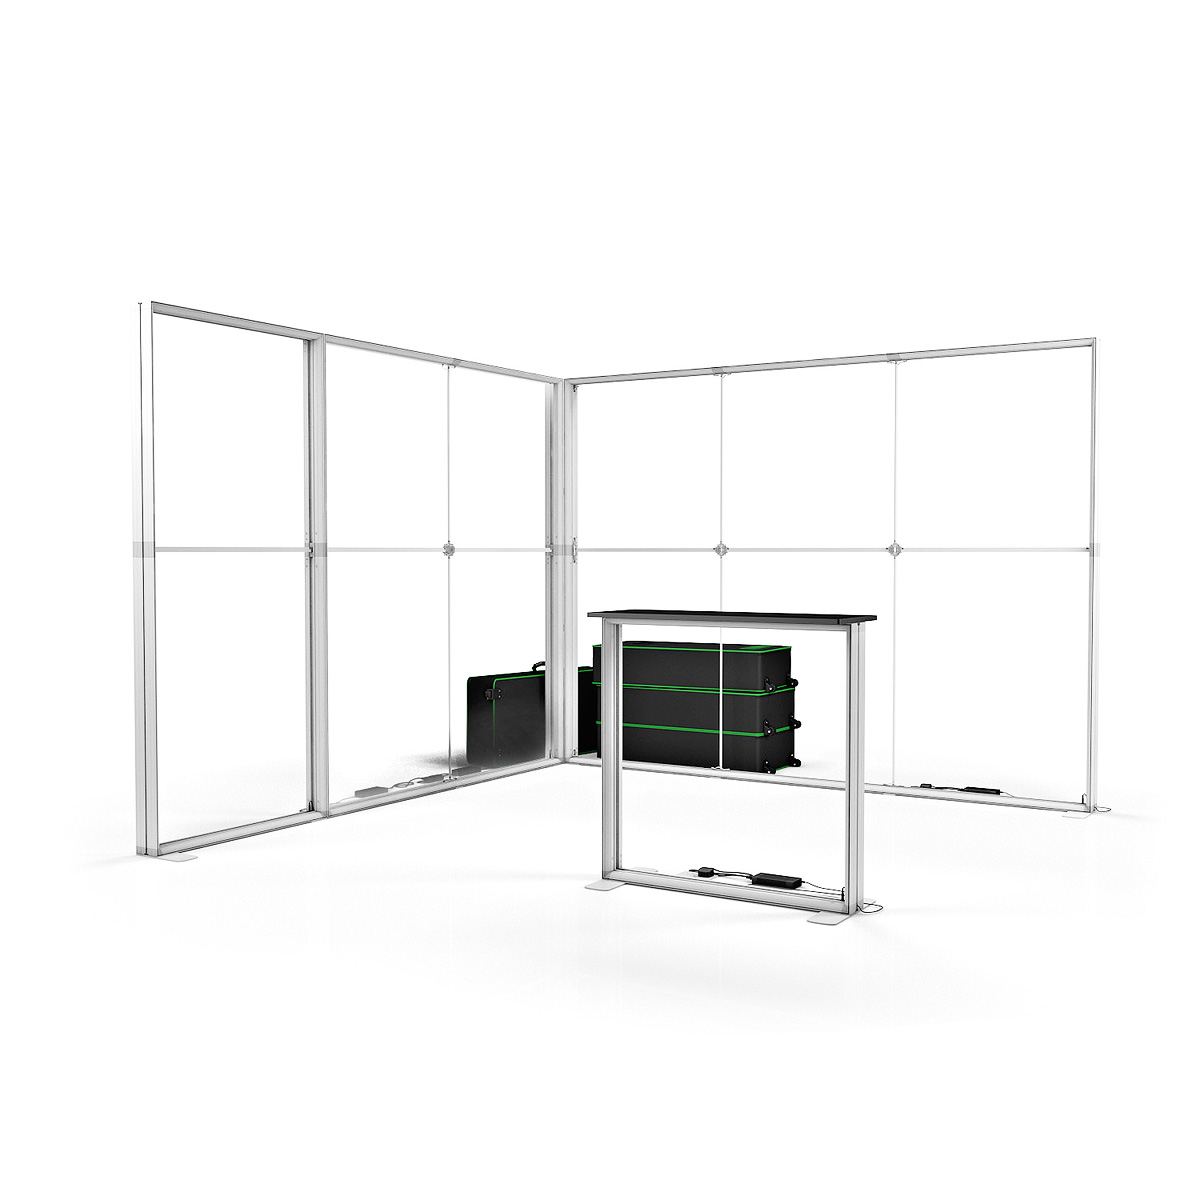 FABRILUX® 3m x 3m LED Lightboxes Tension SEG Fabric Exhibition Stands White Frame Hardware Kit 14